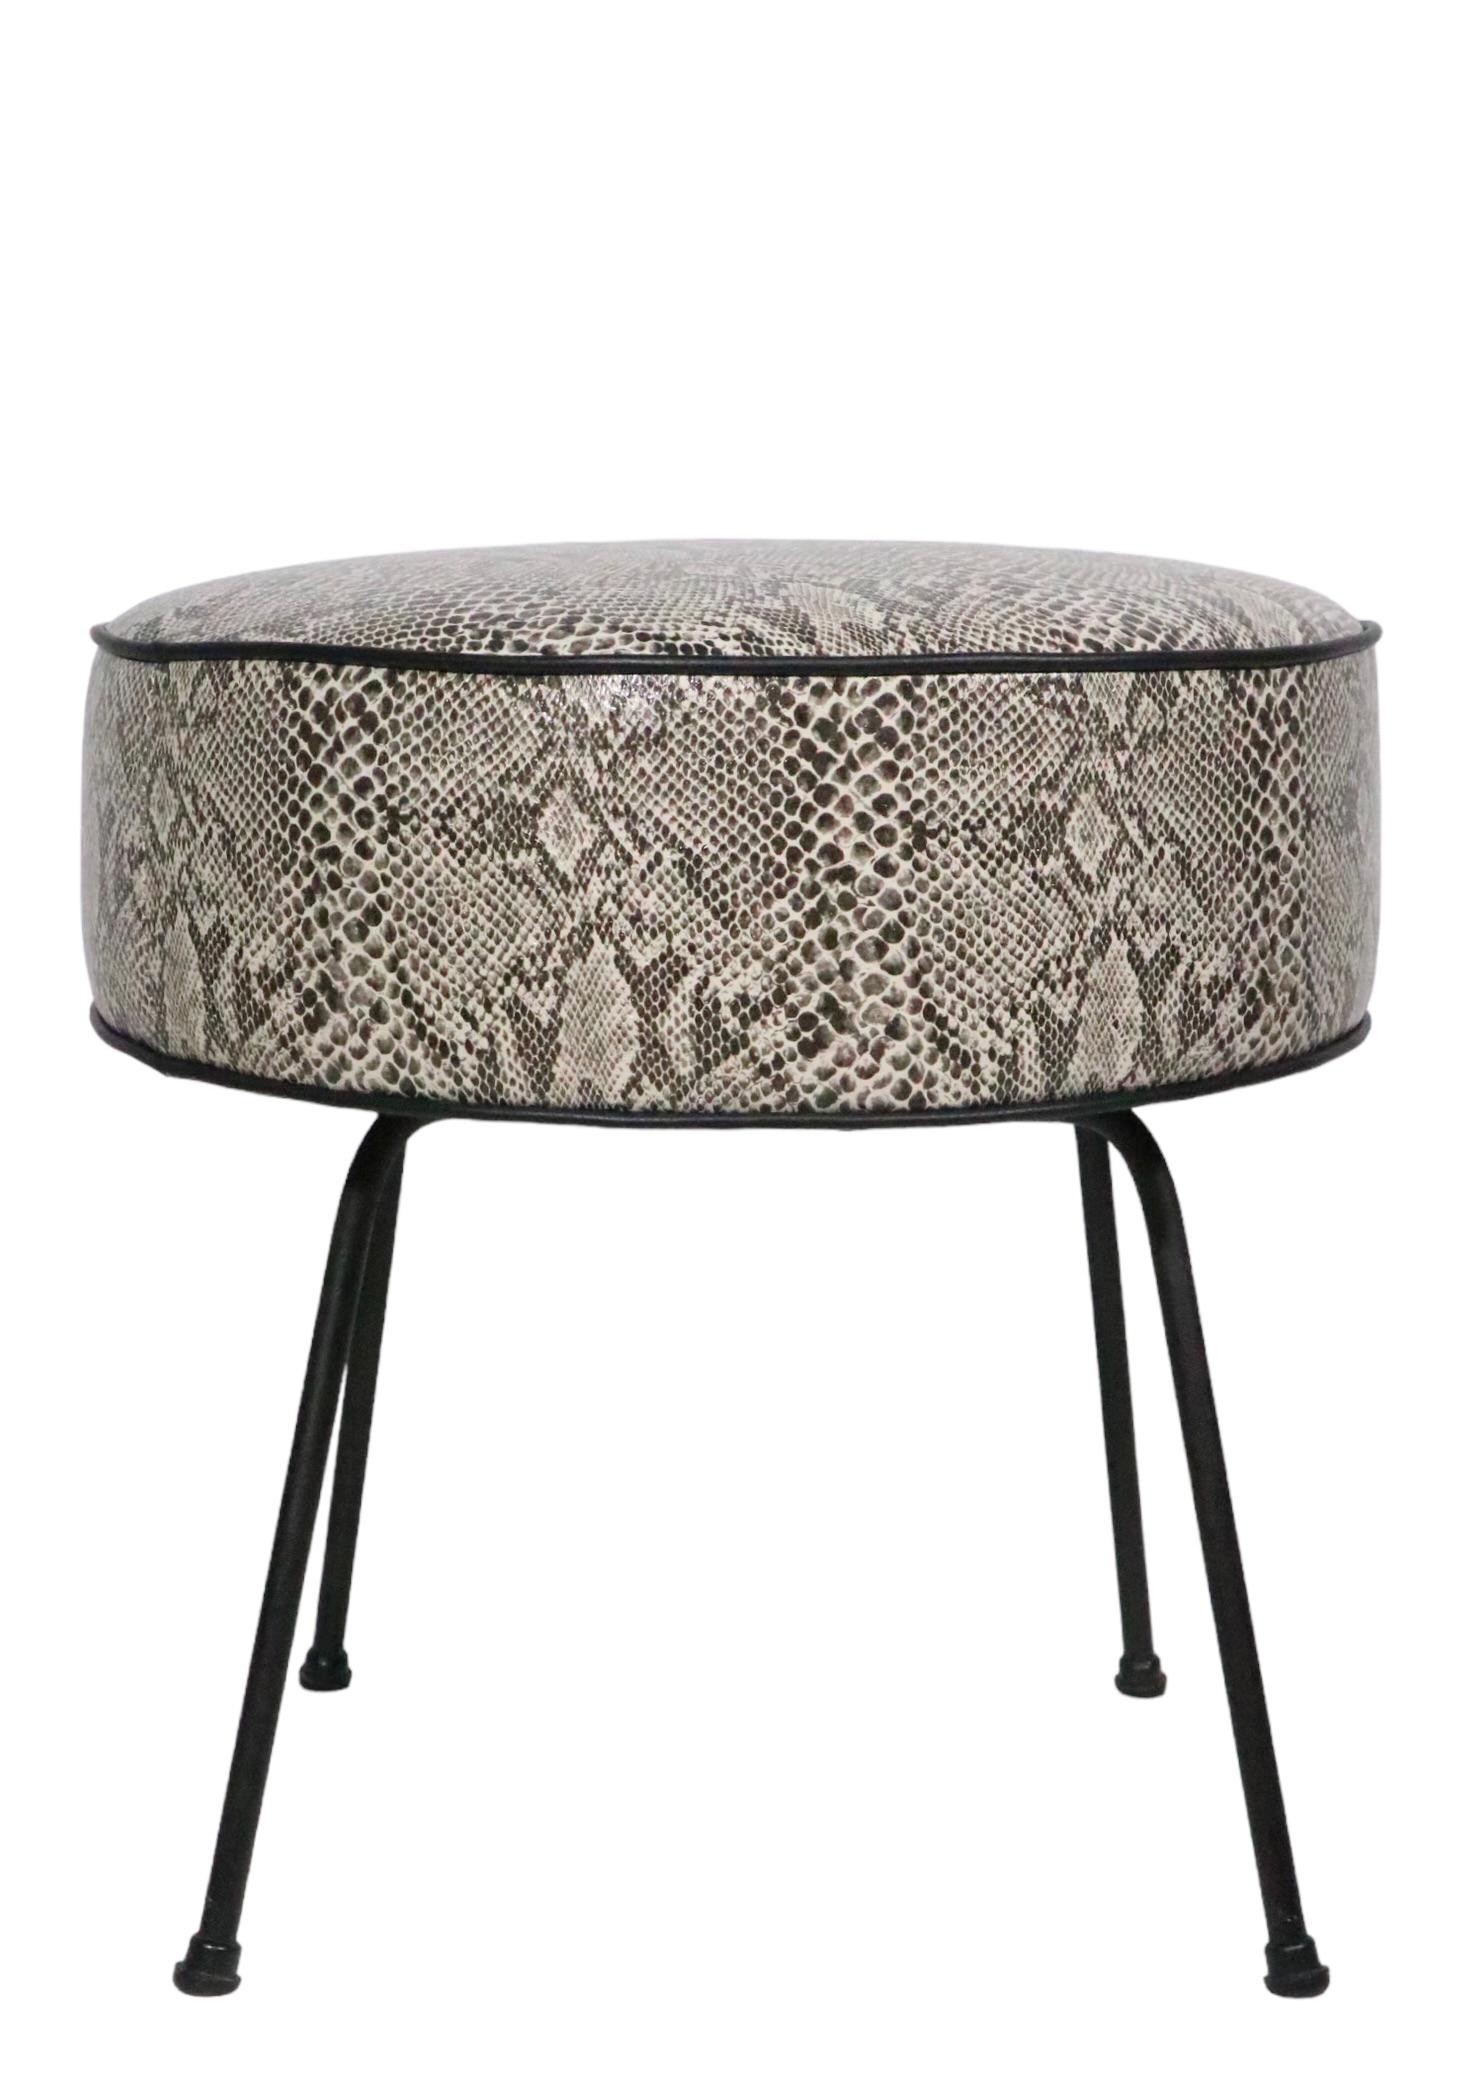 Mid Century Foot Stool Pouf Ottoman Reupholstered in Black and White Faux Python 4